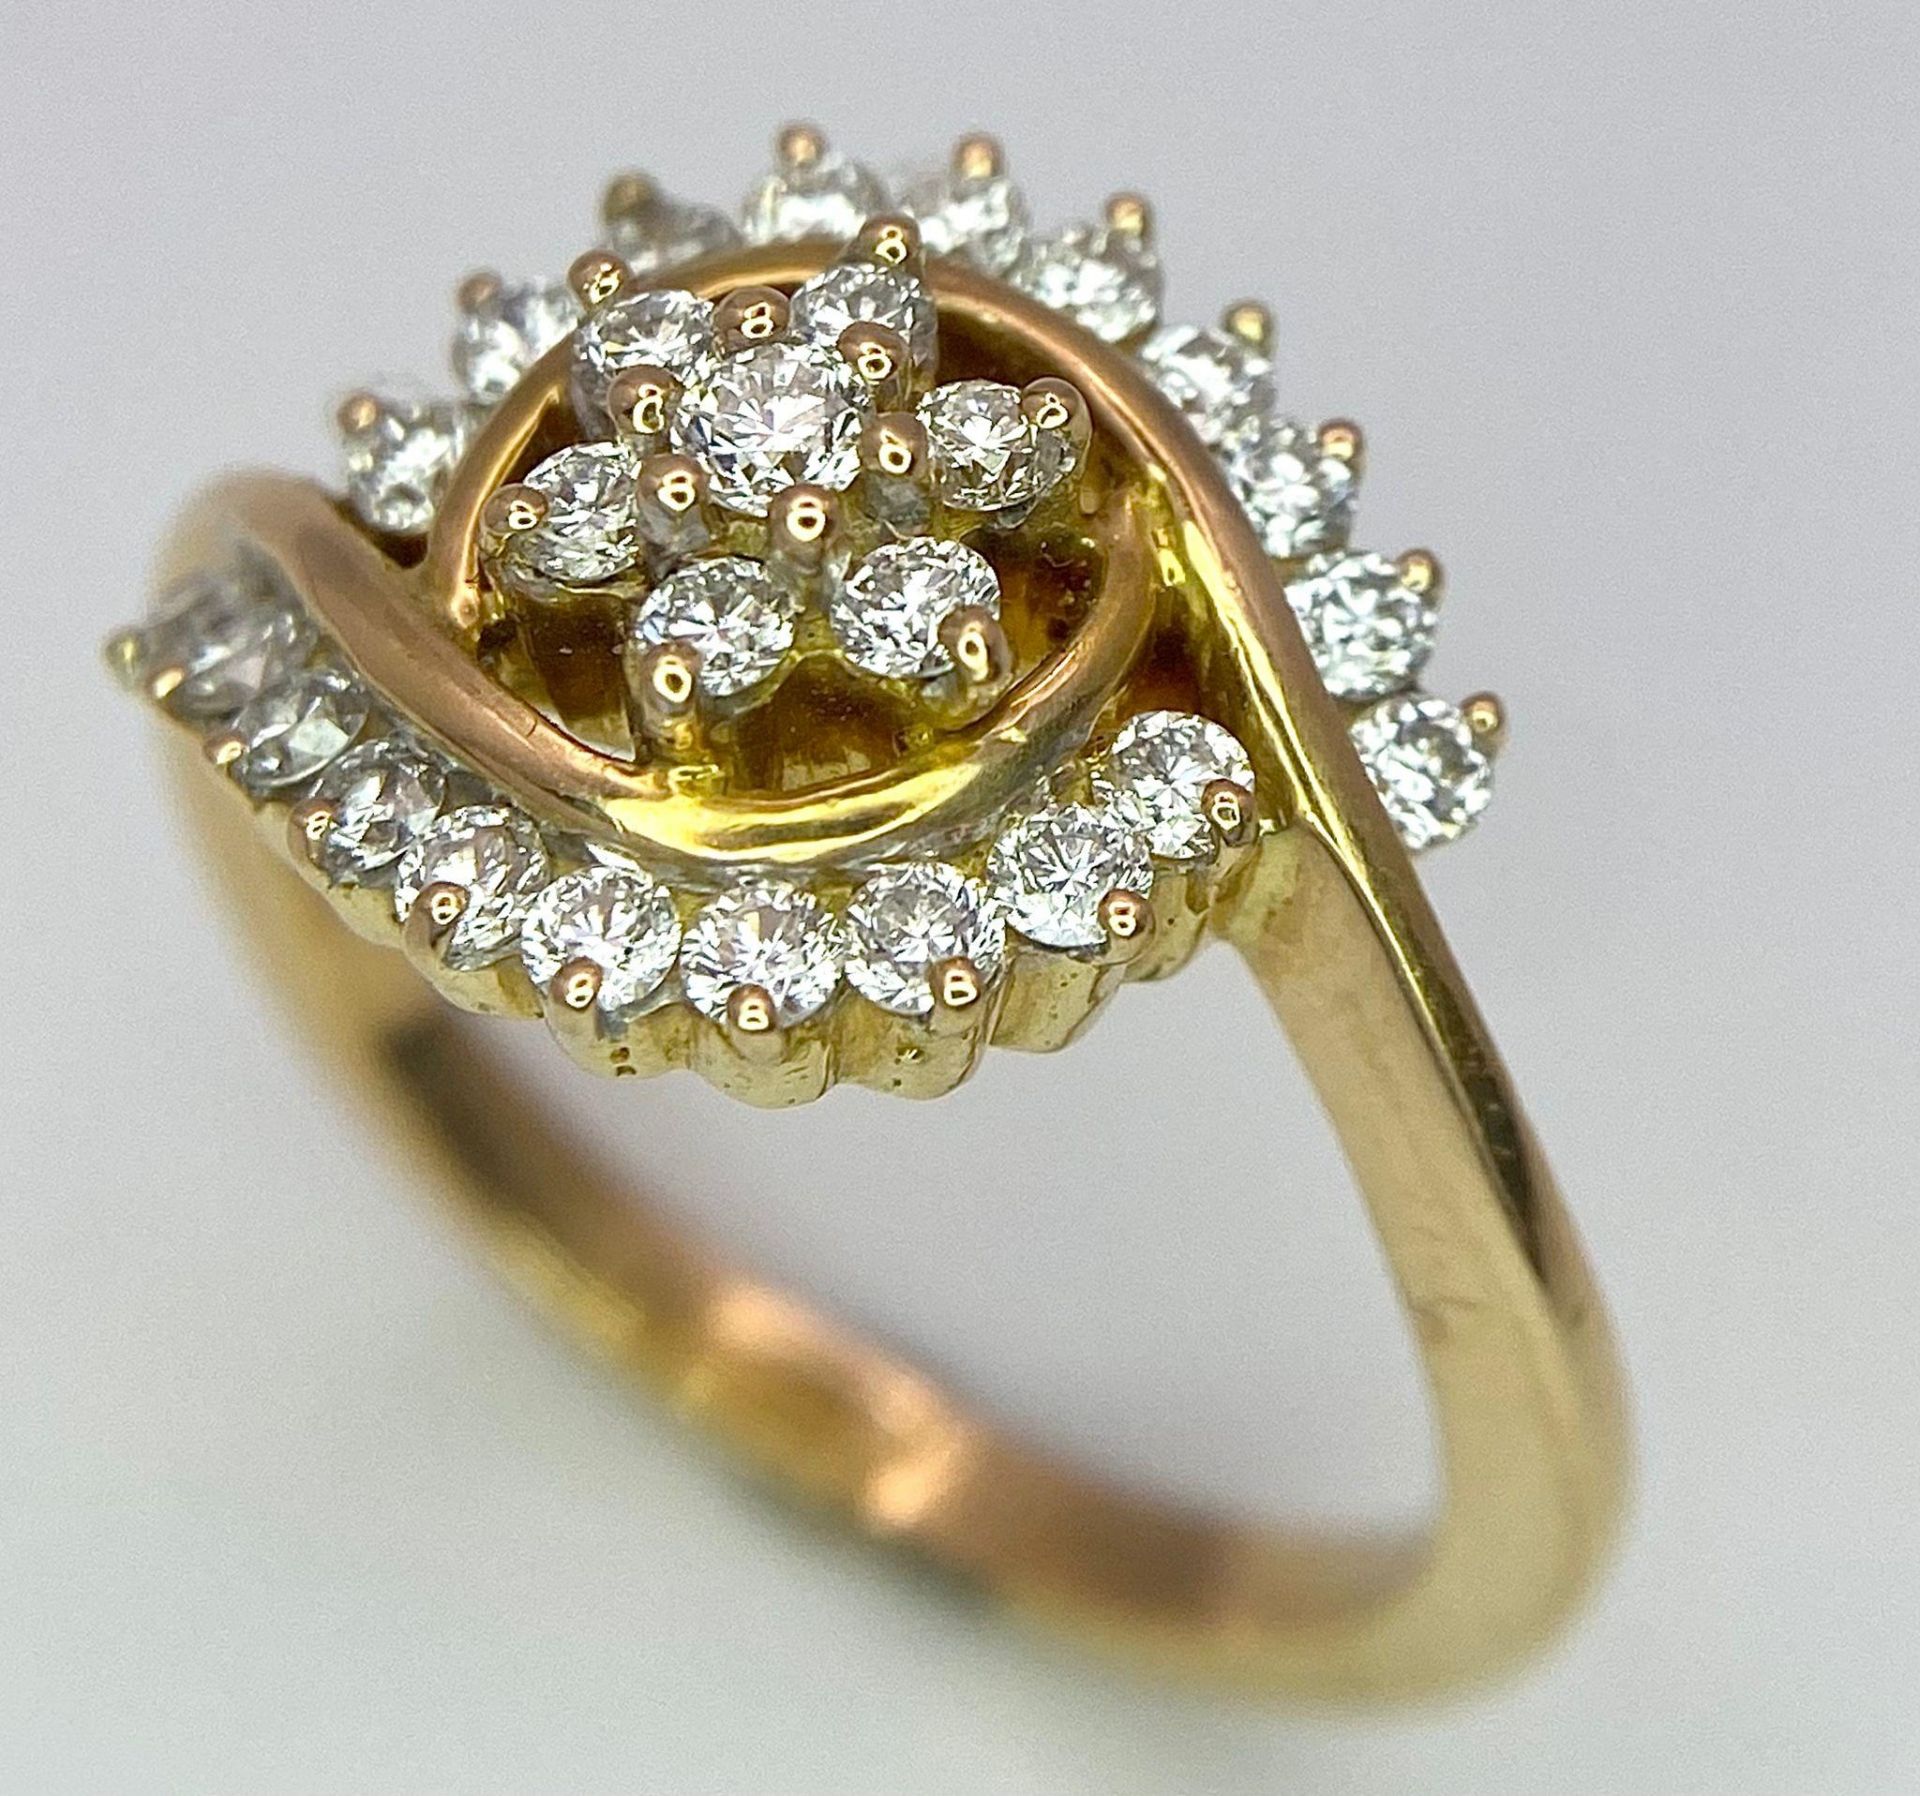 An attractive 14K Yellow Gold (tested as) Diamond Swirl Ring, 0.55ct diamond weight, 4.6g total